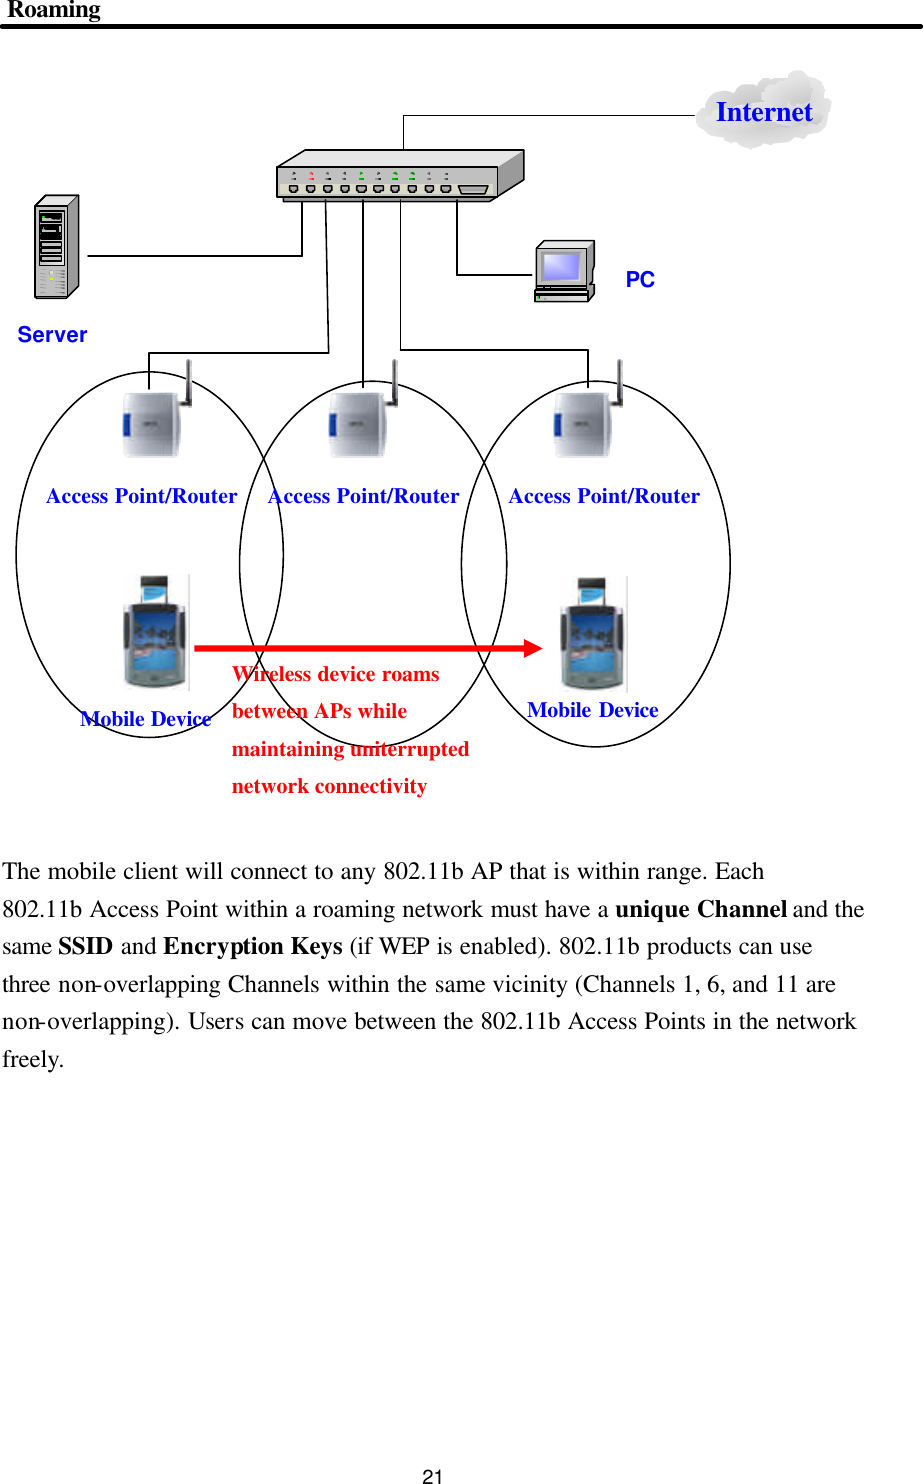  21 Roaming    The mobile client will connect to any 802.11b AP that is within range. Each 802.11b Access Point within a roaming network must have a unique Channel and the same SSID and Encryption Keys (if WEP is enabled). 802.11b products can use three non-overlapping Channels within the same vicinity (Channels 1, 6, and 11 are non-overlapping). Users can move between the 802.11b Access Points in the network freely.          Internet PC Server Access Point/Router Access Point/Router Access Point/Router Mobile Device Mobile Device Wireless device roams between APs while maintaining uniterrupted network connectivity   